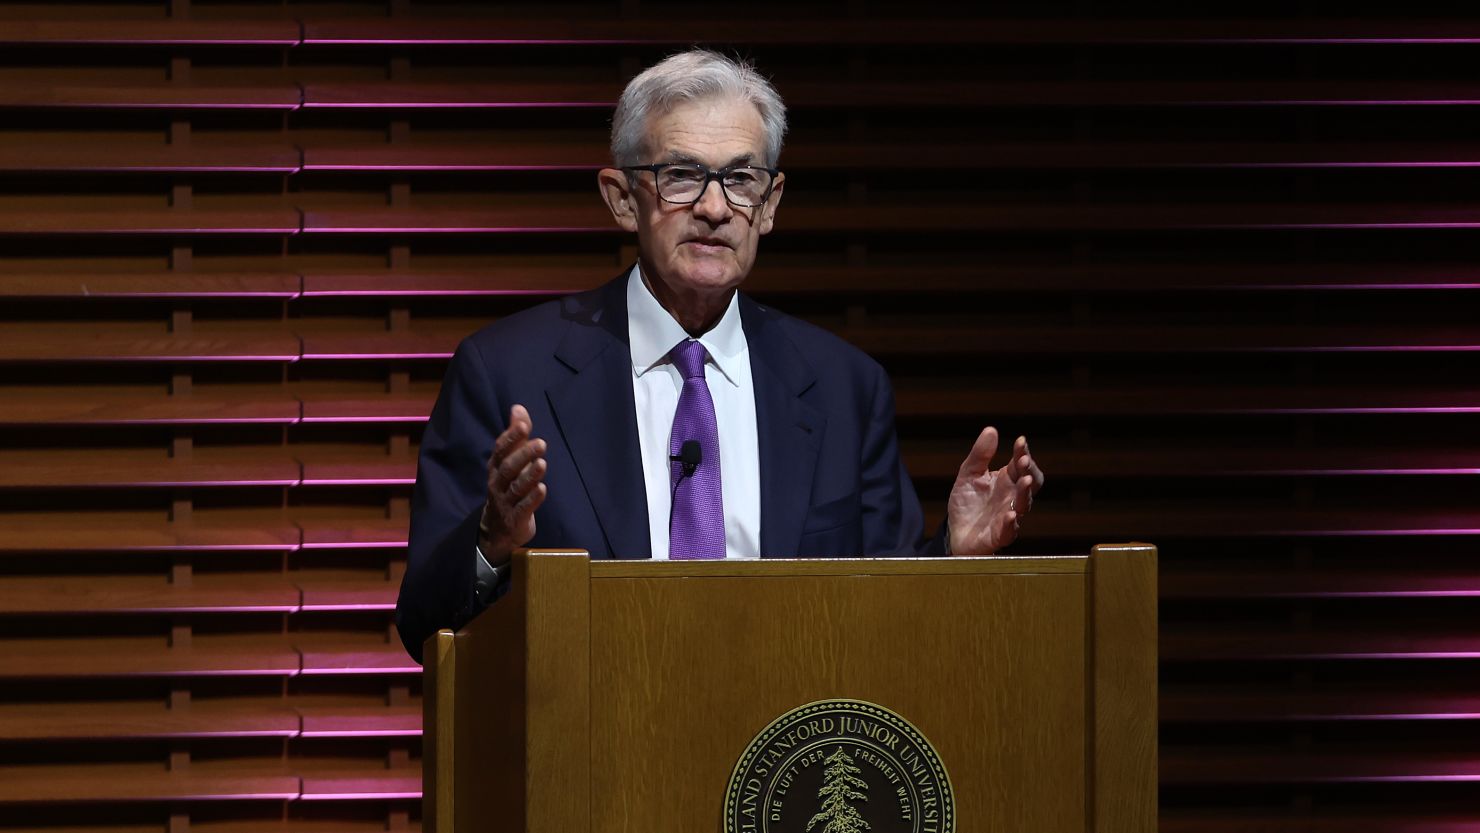 Federal Reserve Chair Jerome Powell speaks at Stanford University on April 3 in Stanford, California.